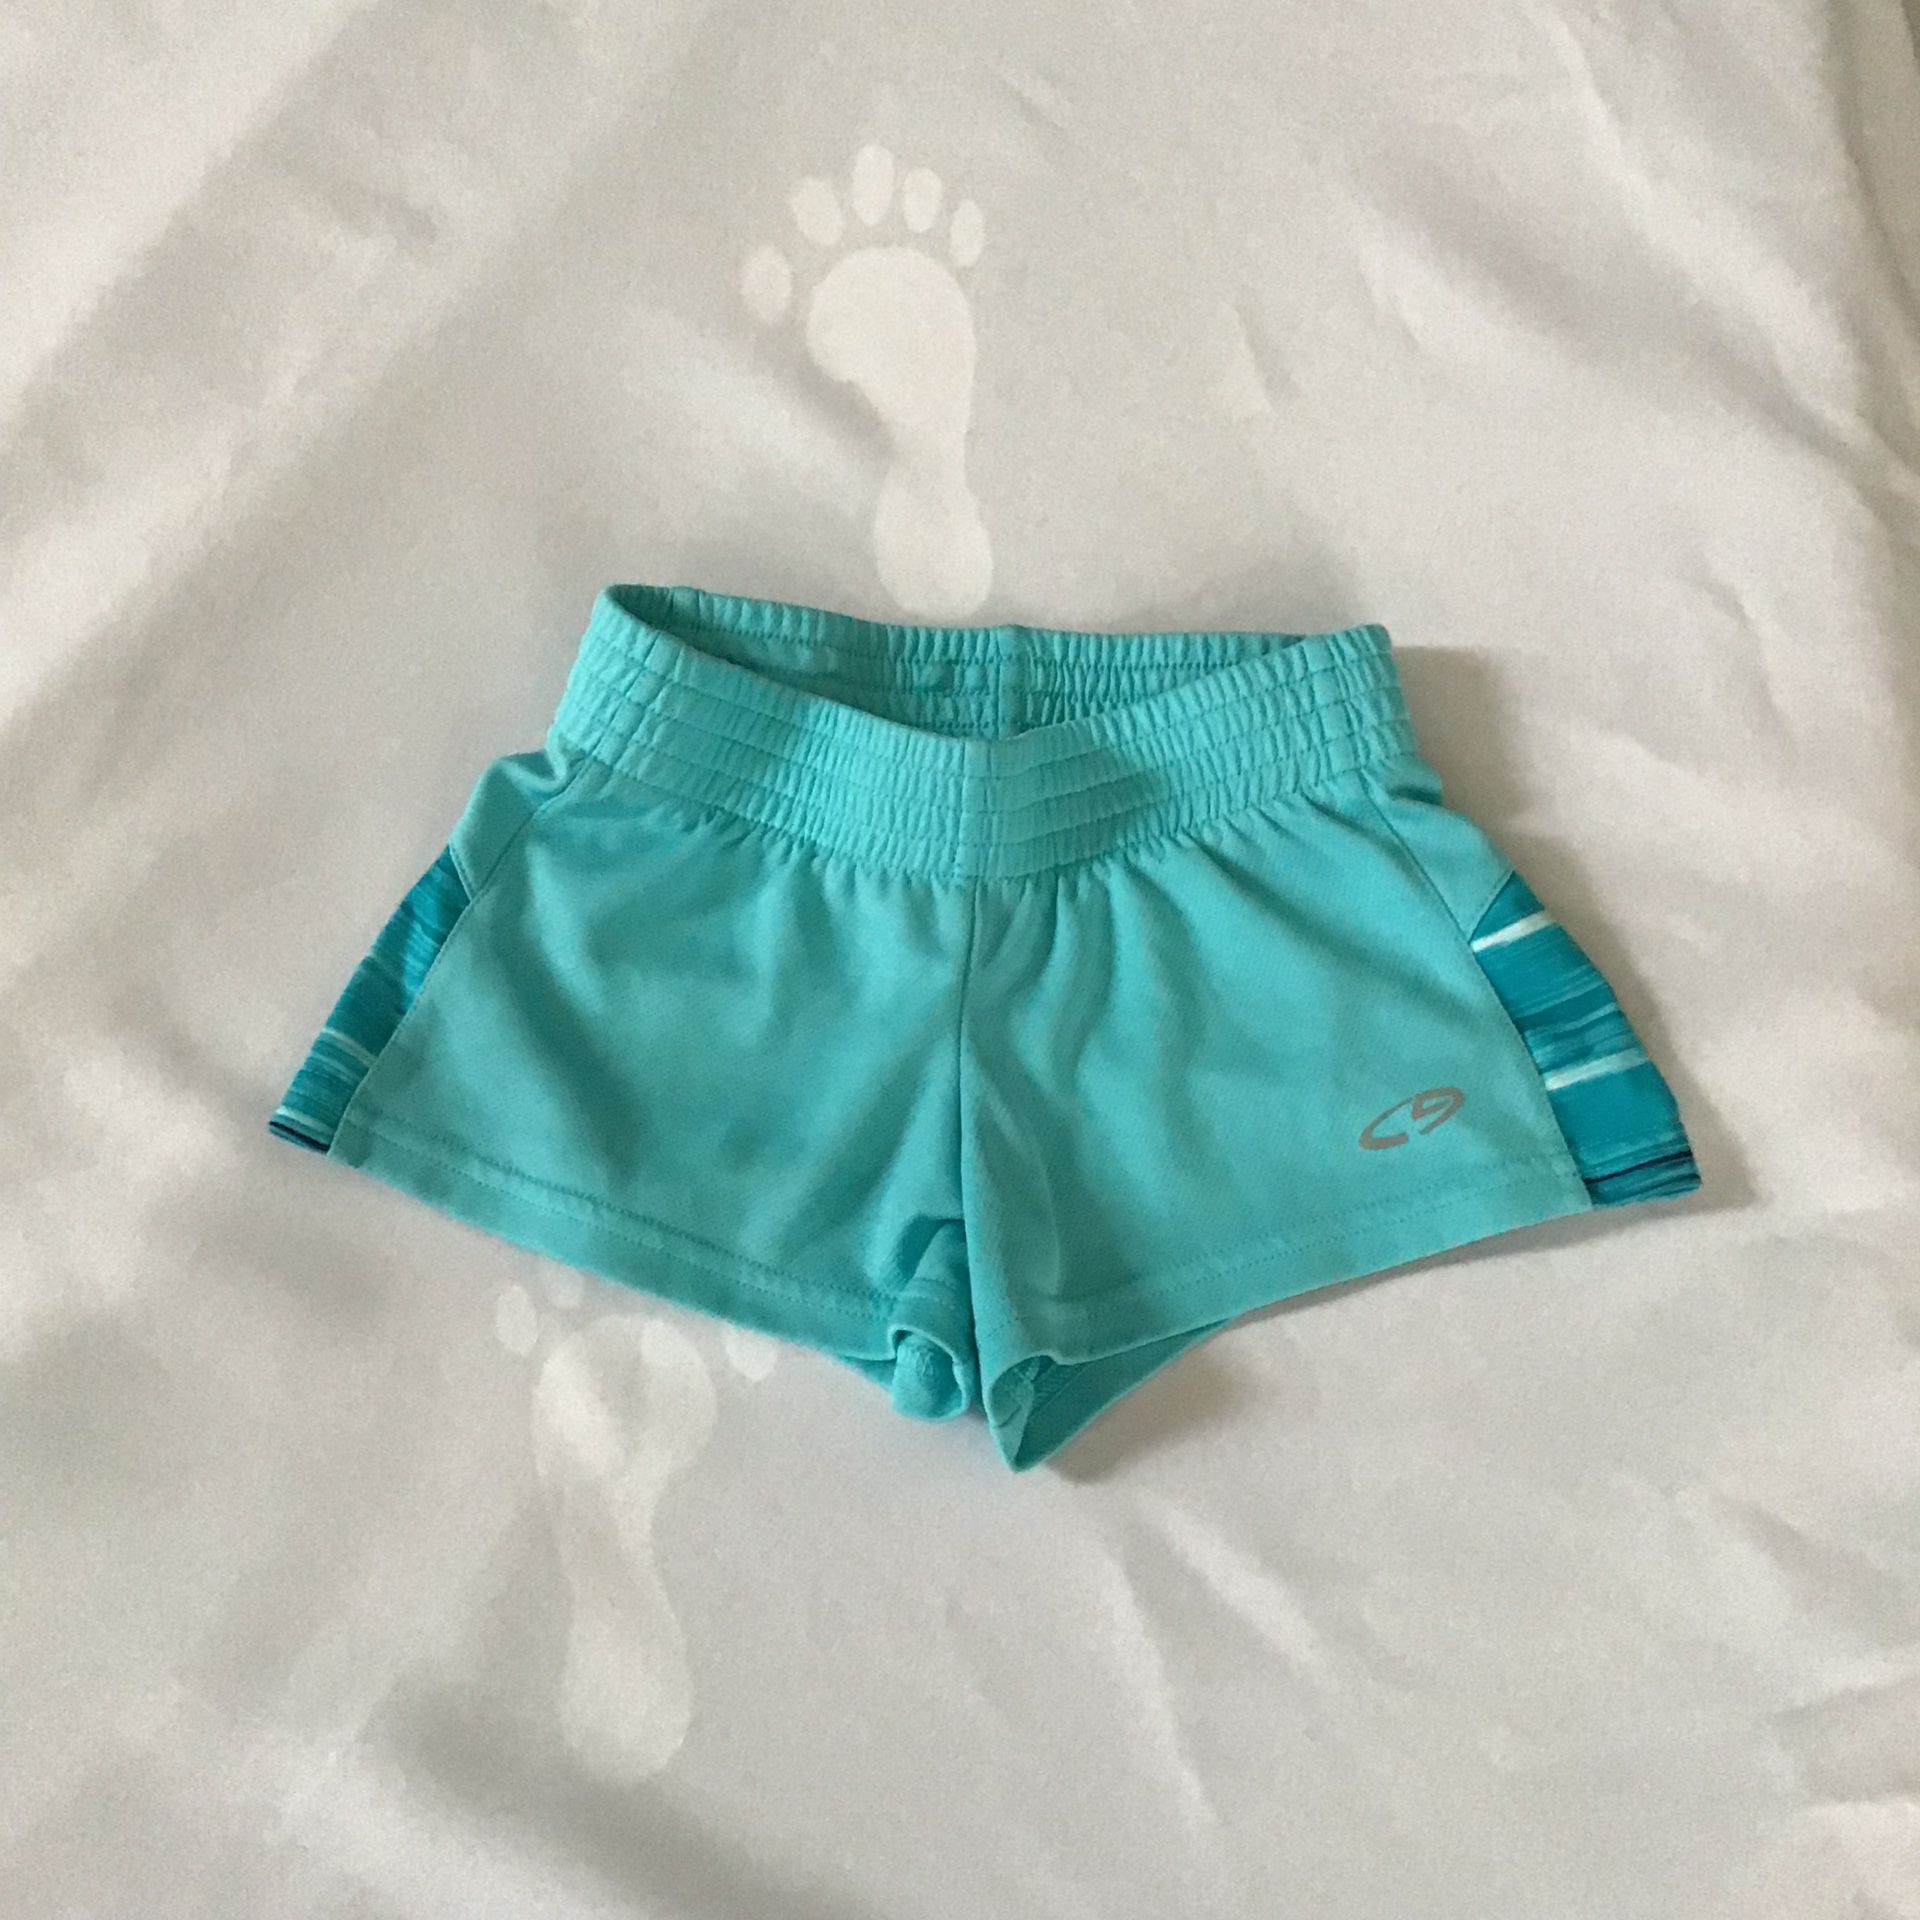 Turquoise and teal seafoam green champion girls shorts duo dry size extra small XS 4-5